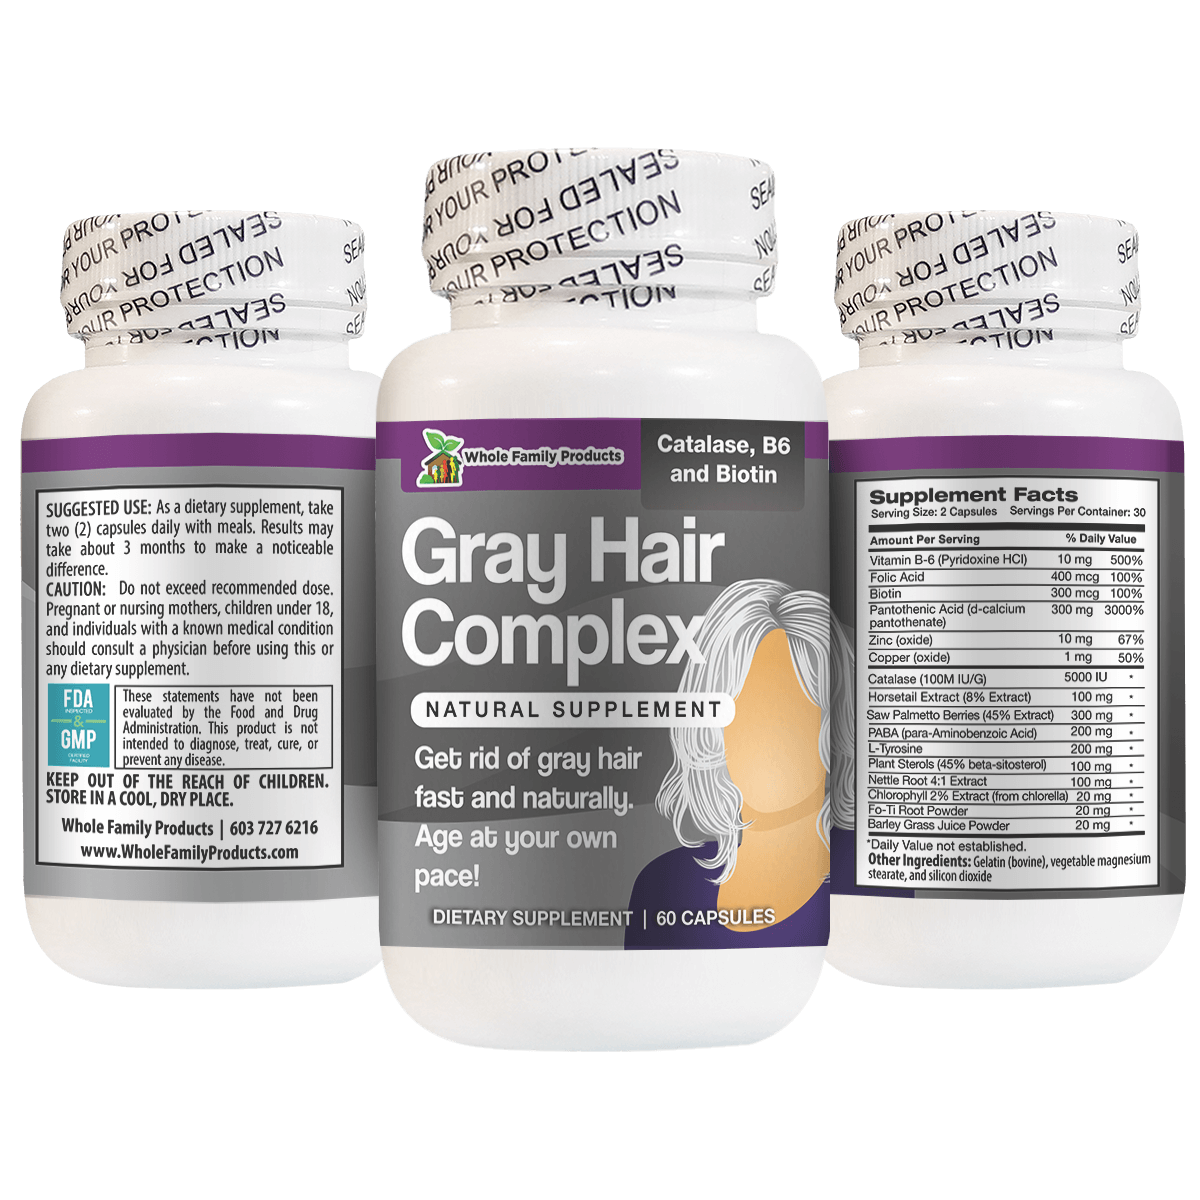 Gray Hair Complex Get Rid of Gray Hair Fast and Naturally